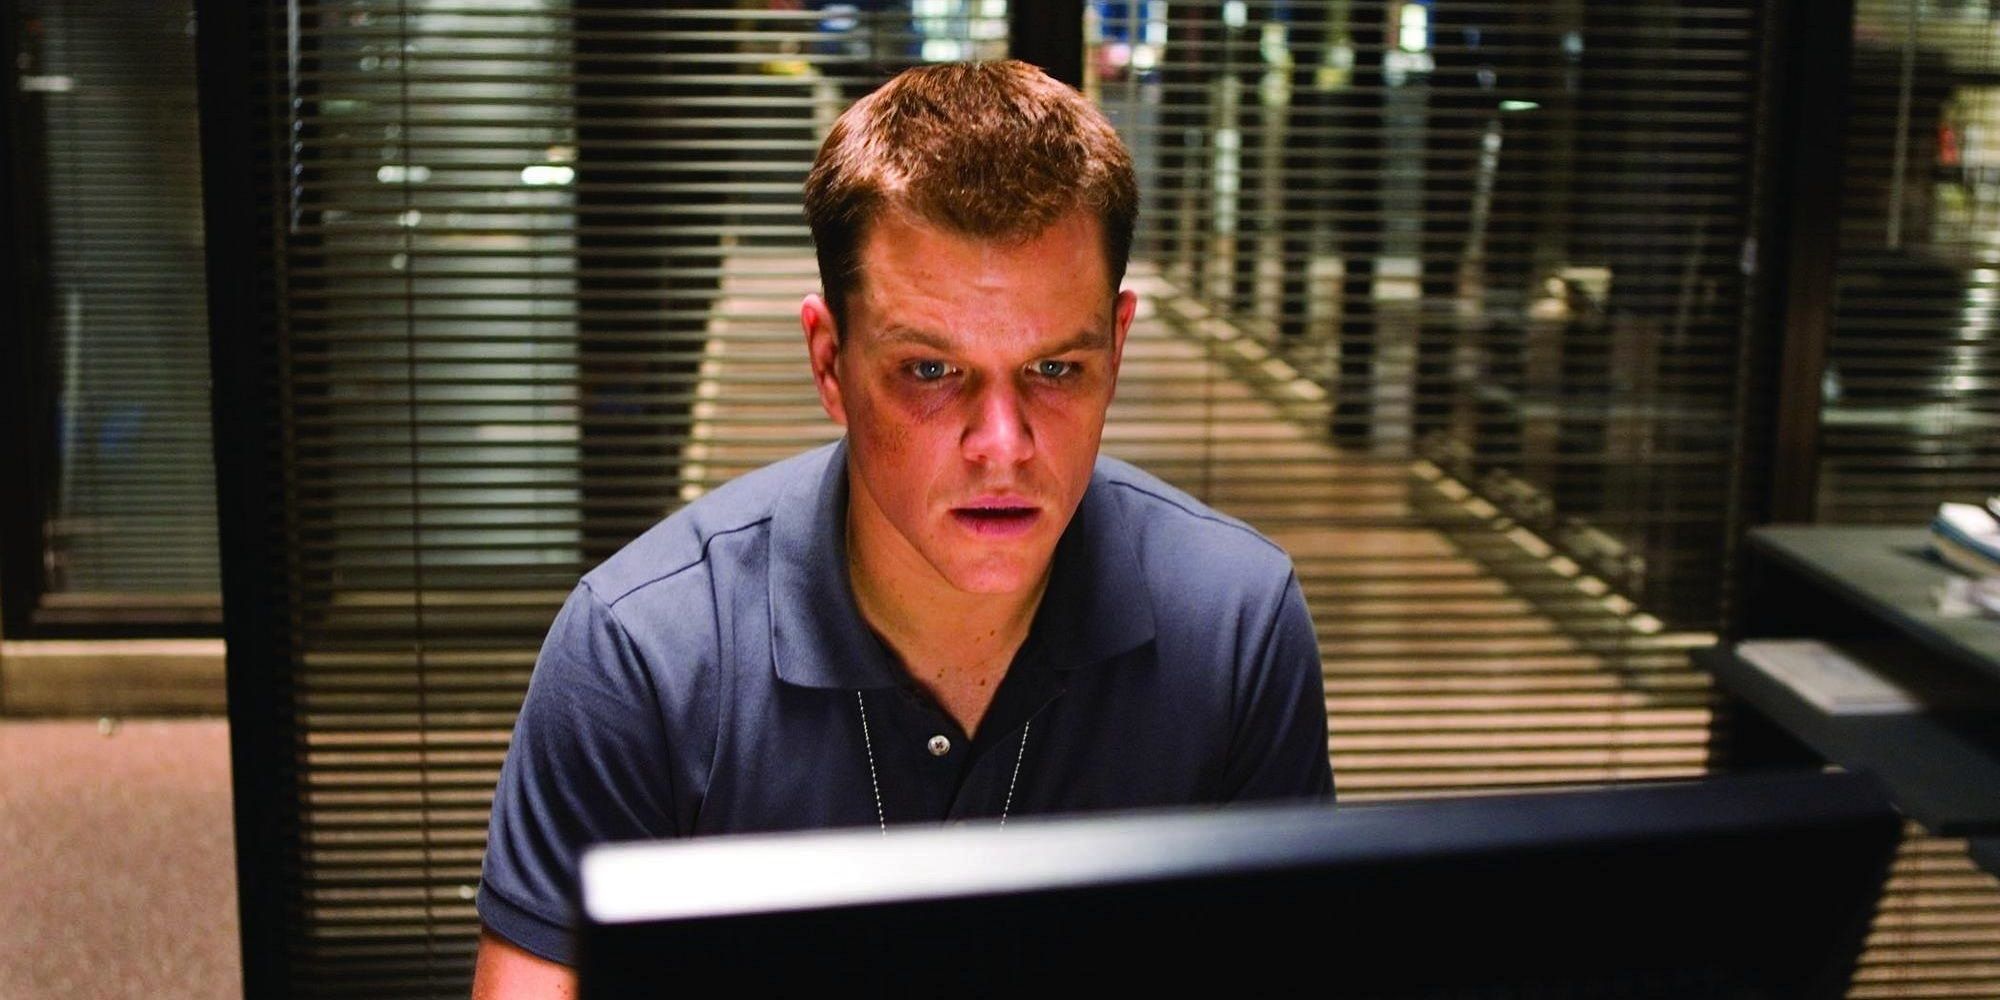 Matt Damon looks concerned at a computer from The Departed 